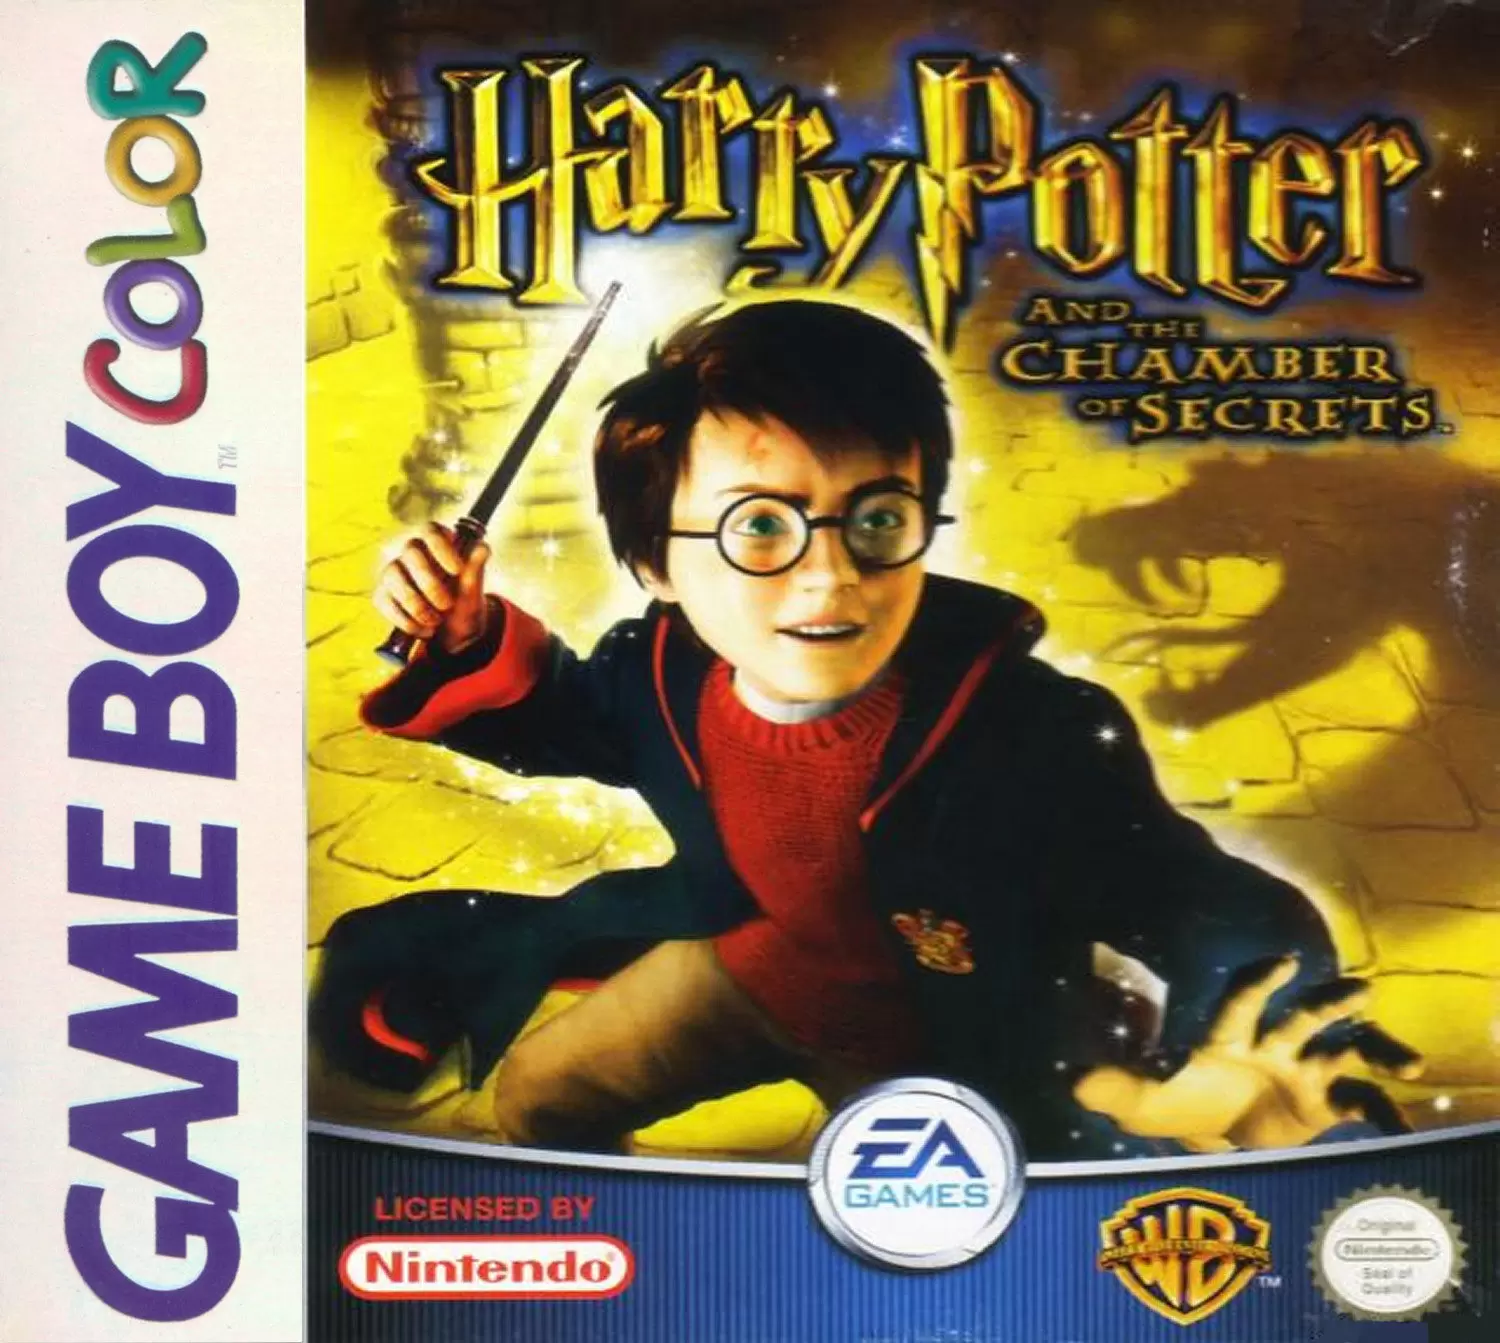 Game Boy Color Games - NINTENDO GAMEBOY COLOR & GAMEBOY COLOR GAMES PRESENTS HARRY POTTER AND THE CHAMBER OF SECRETS!